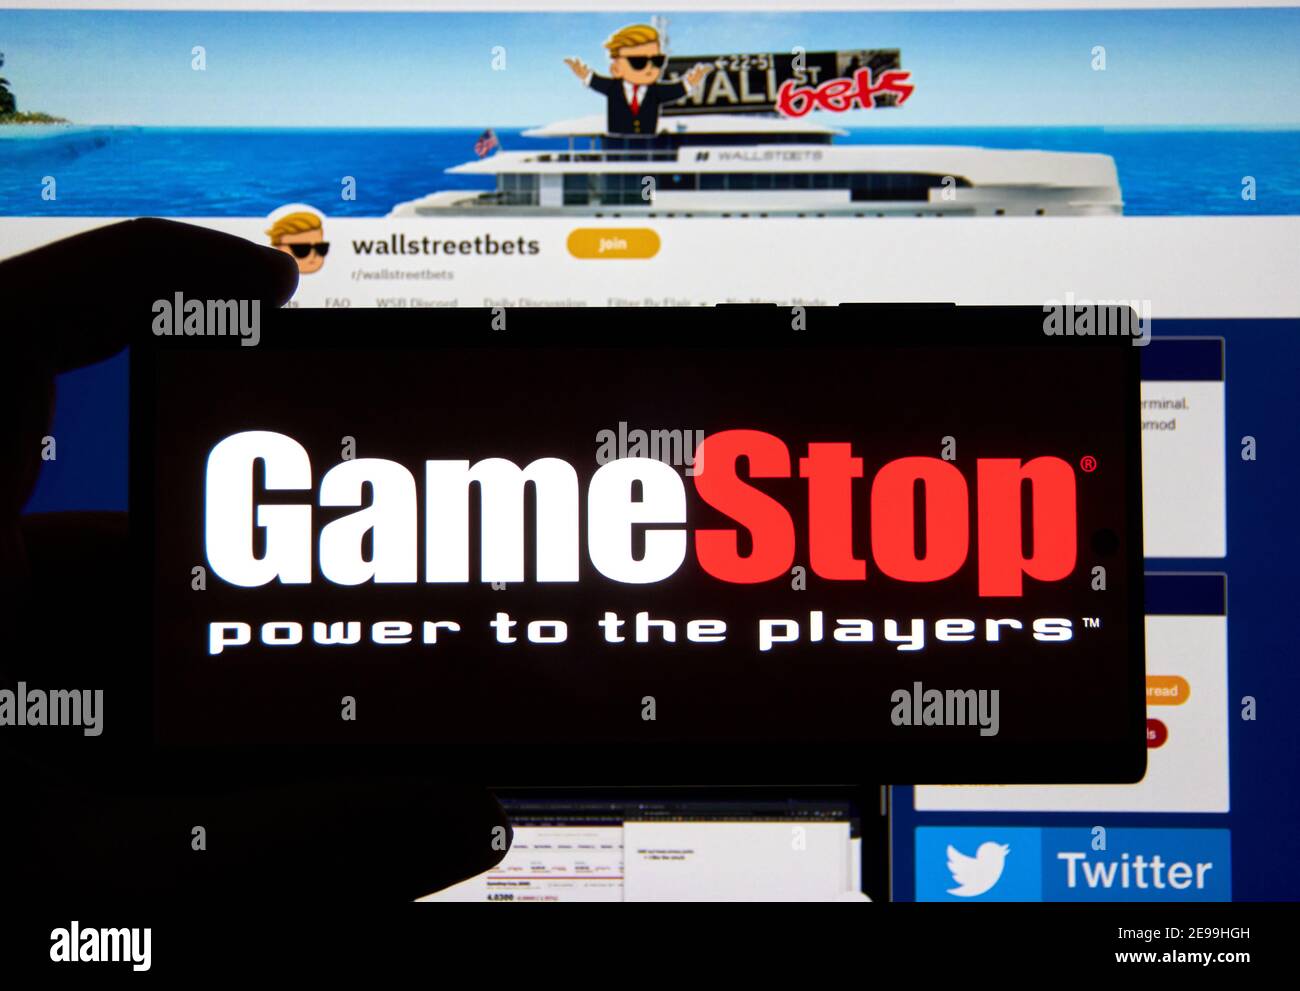 Montreal, Canada - February 3, 2021: Gamestop logo over wallstreetbets subreddit webpage. It is an American video game, consumer electronics, and reta Stock Photo